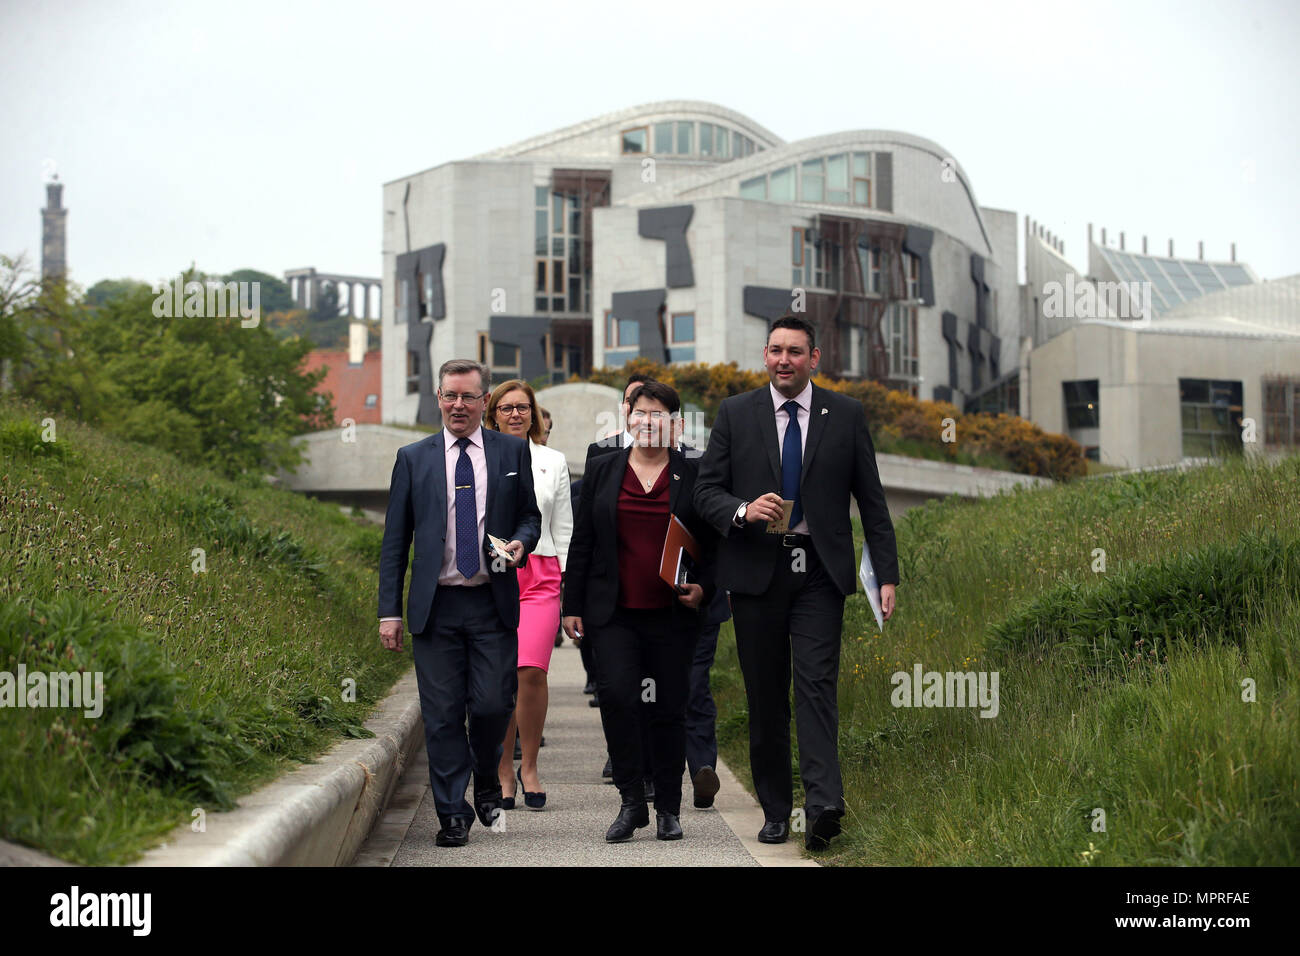 Scottish Conservative leader Ruth Davidson (centre), arrives alongside other MSPs to spread poppy seeds in the grounds of the Scottish Parliament in Edinburgh, to create a Garden of Remembrance which is part of the nationwide Ribbon of Poppies campaign to pay tribute to those who have died in war. Stock Photo